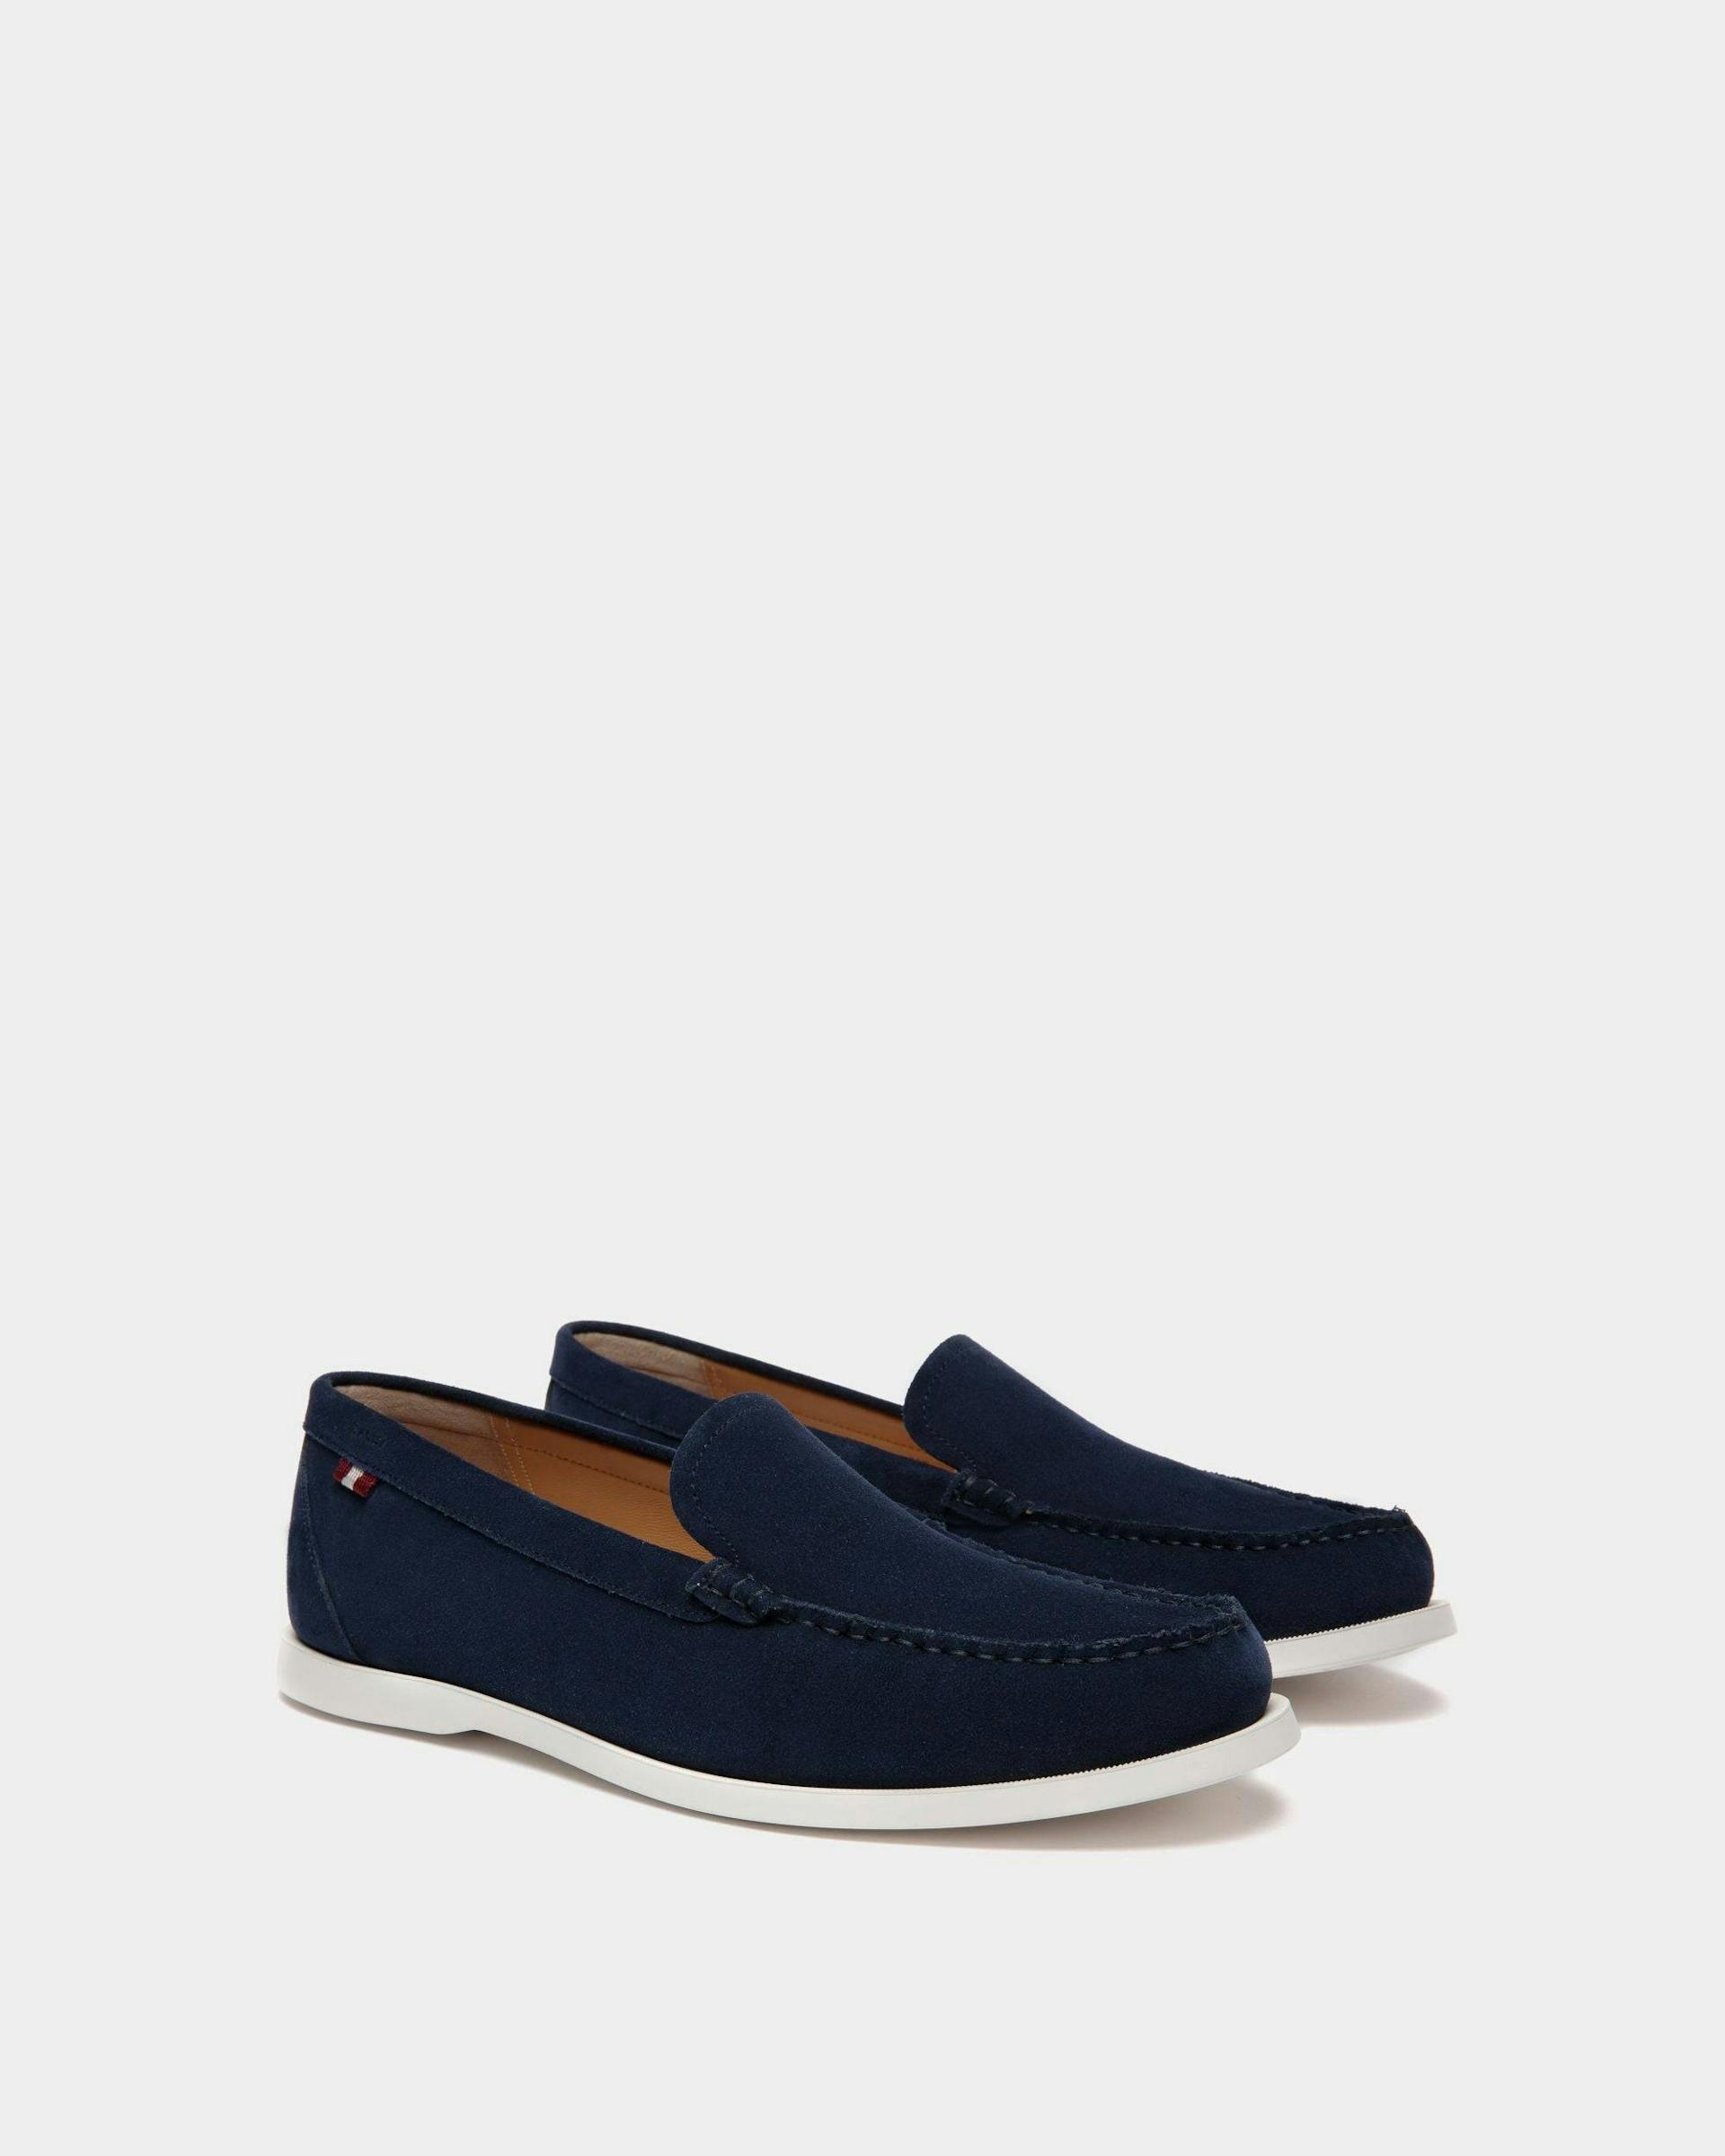 Men's Nelson Loafer in Suede | Bally | Still Life 3/4 Front